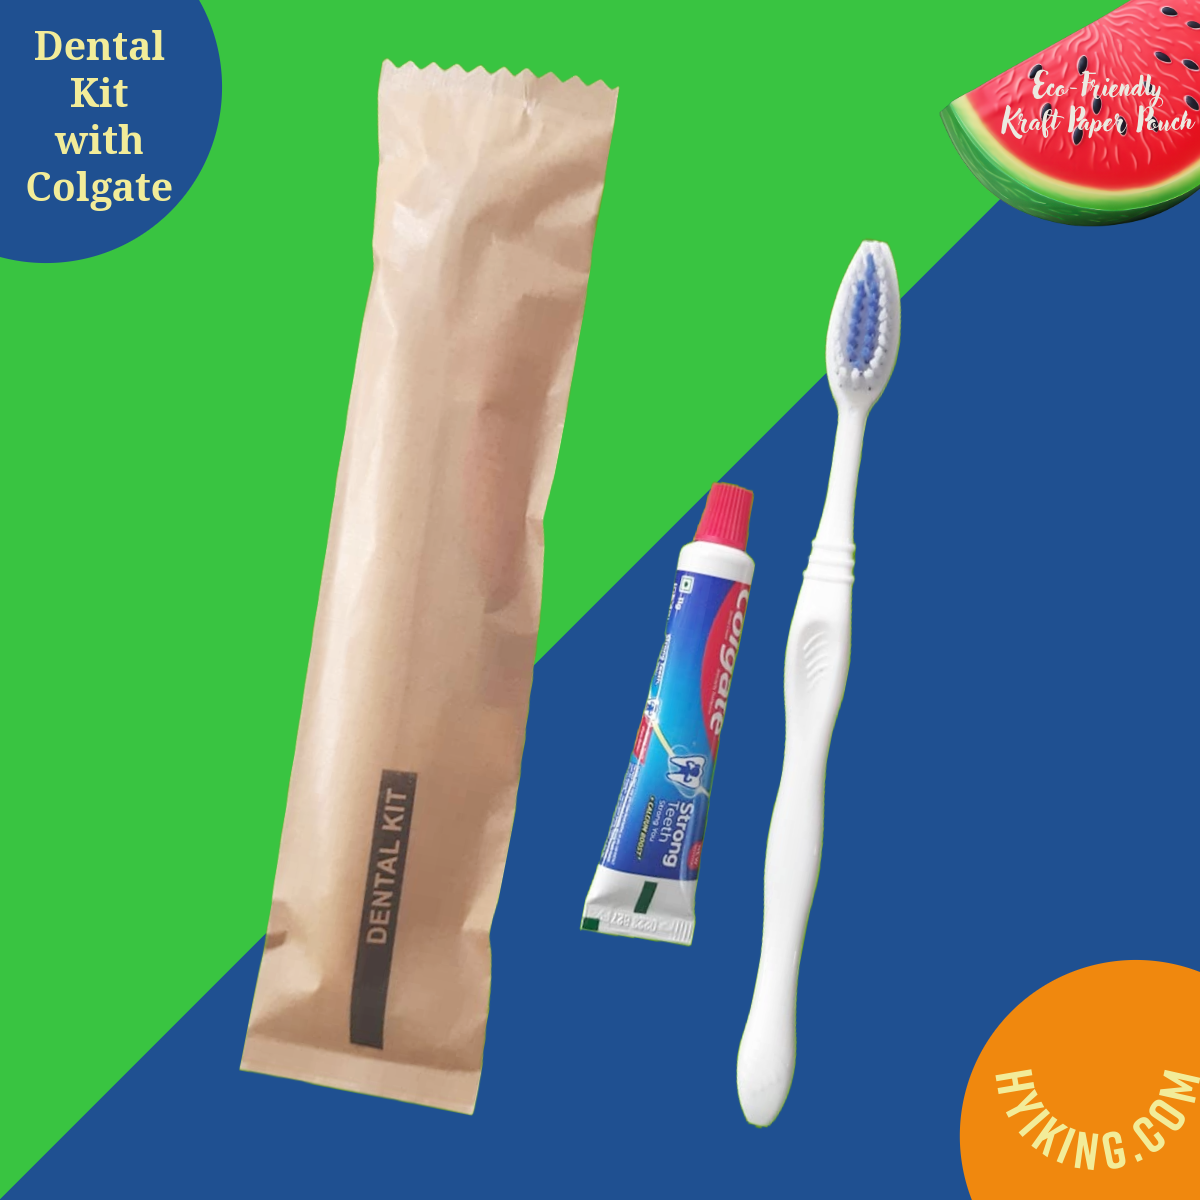 Dental Kit with Colgate Toothpaste & Toothbrush: Your Guests Eco-Conscious Guest amenity kit